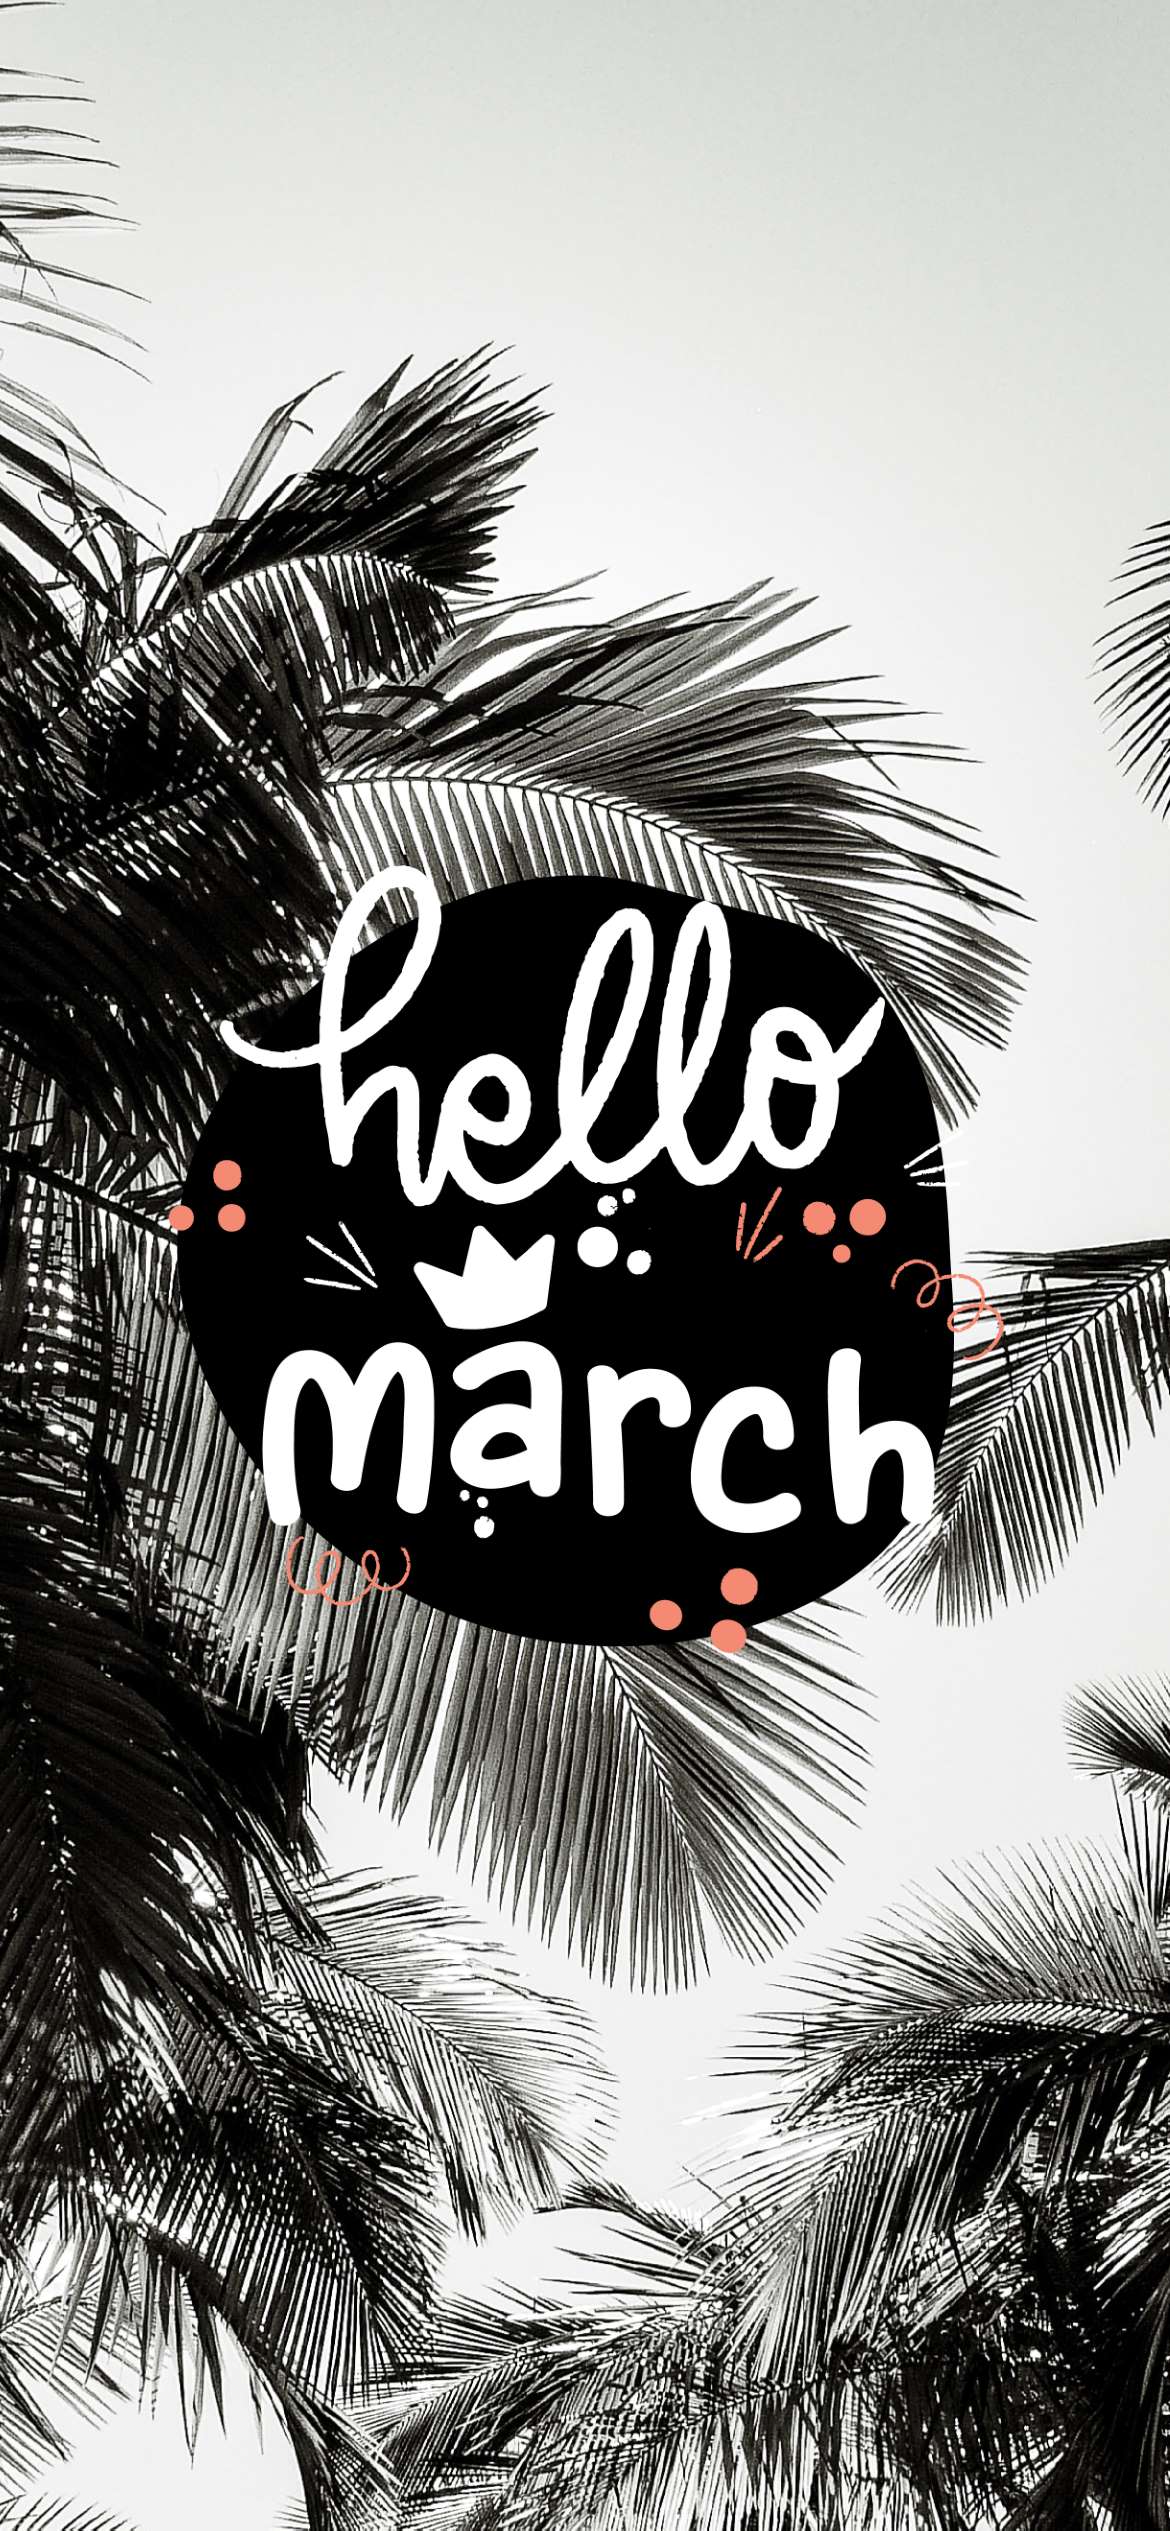 A black and white image of palm trees with the words hello march - March